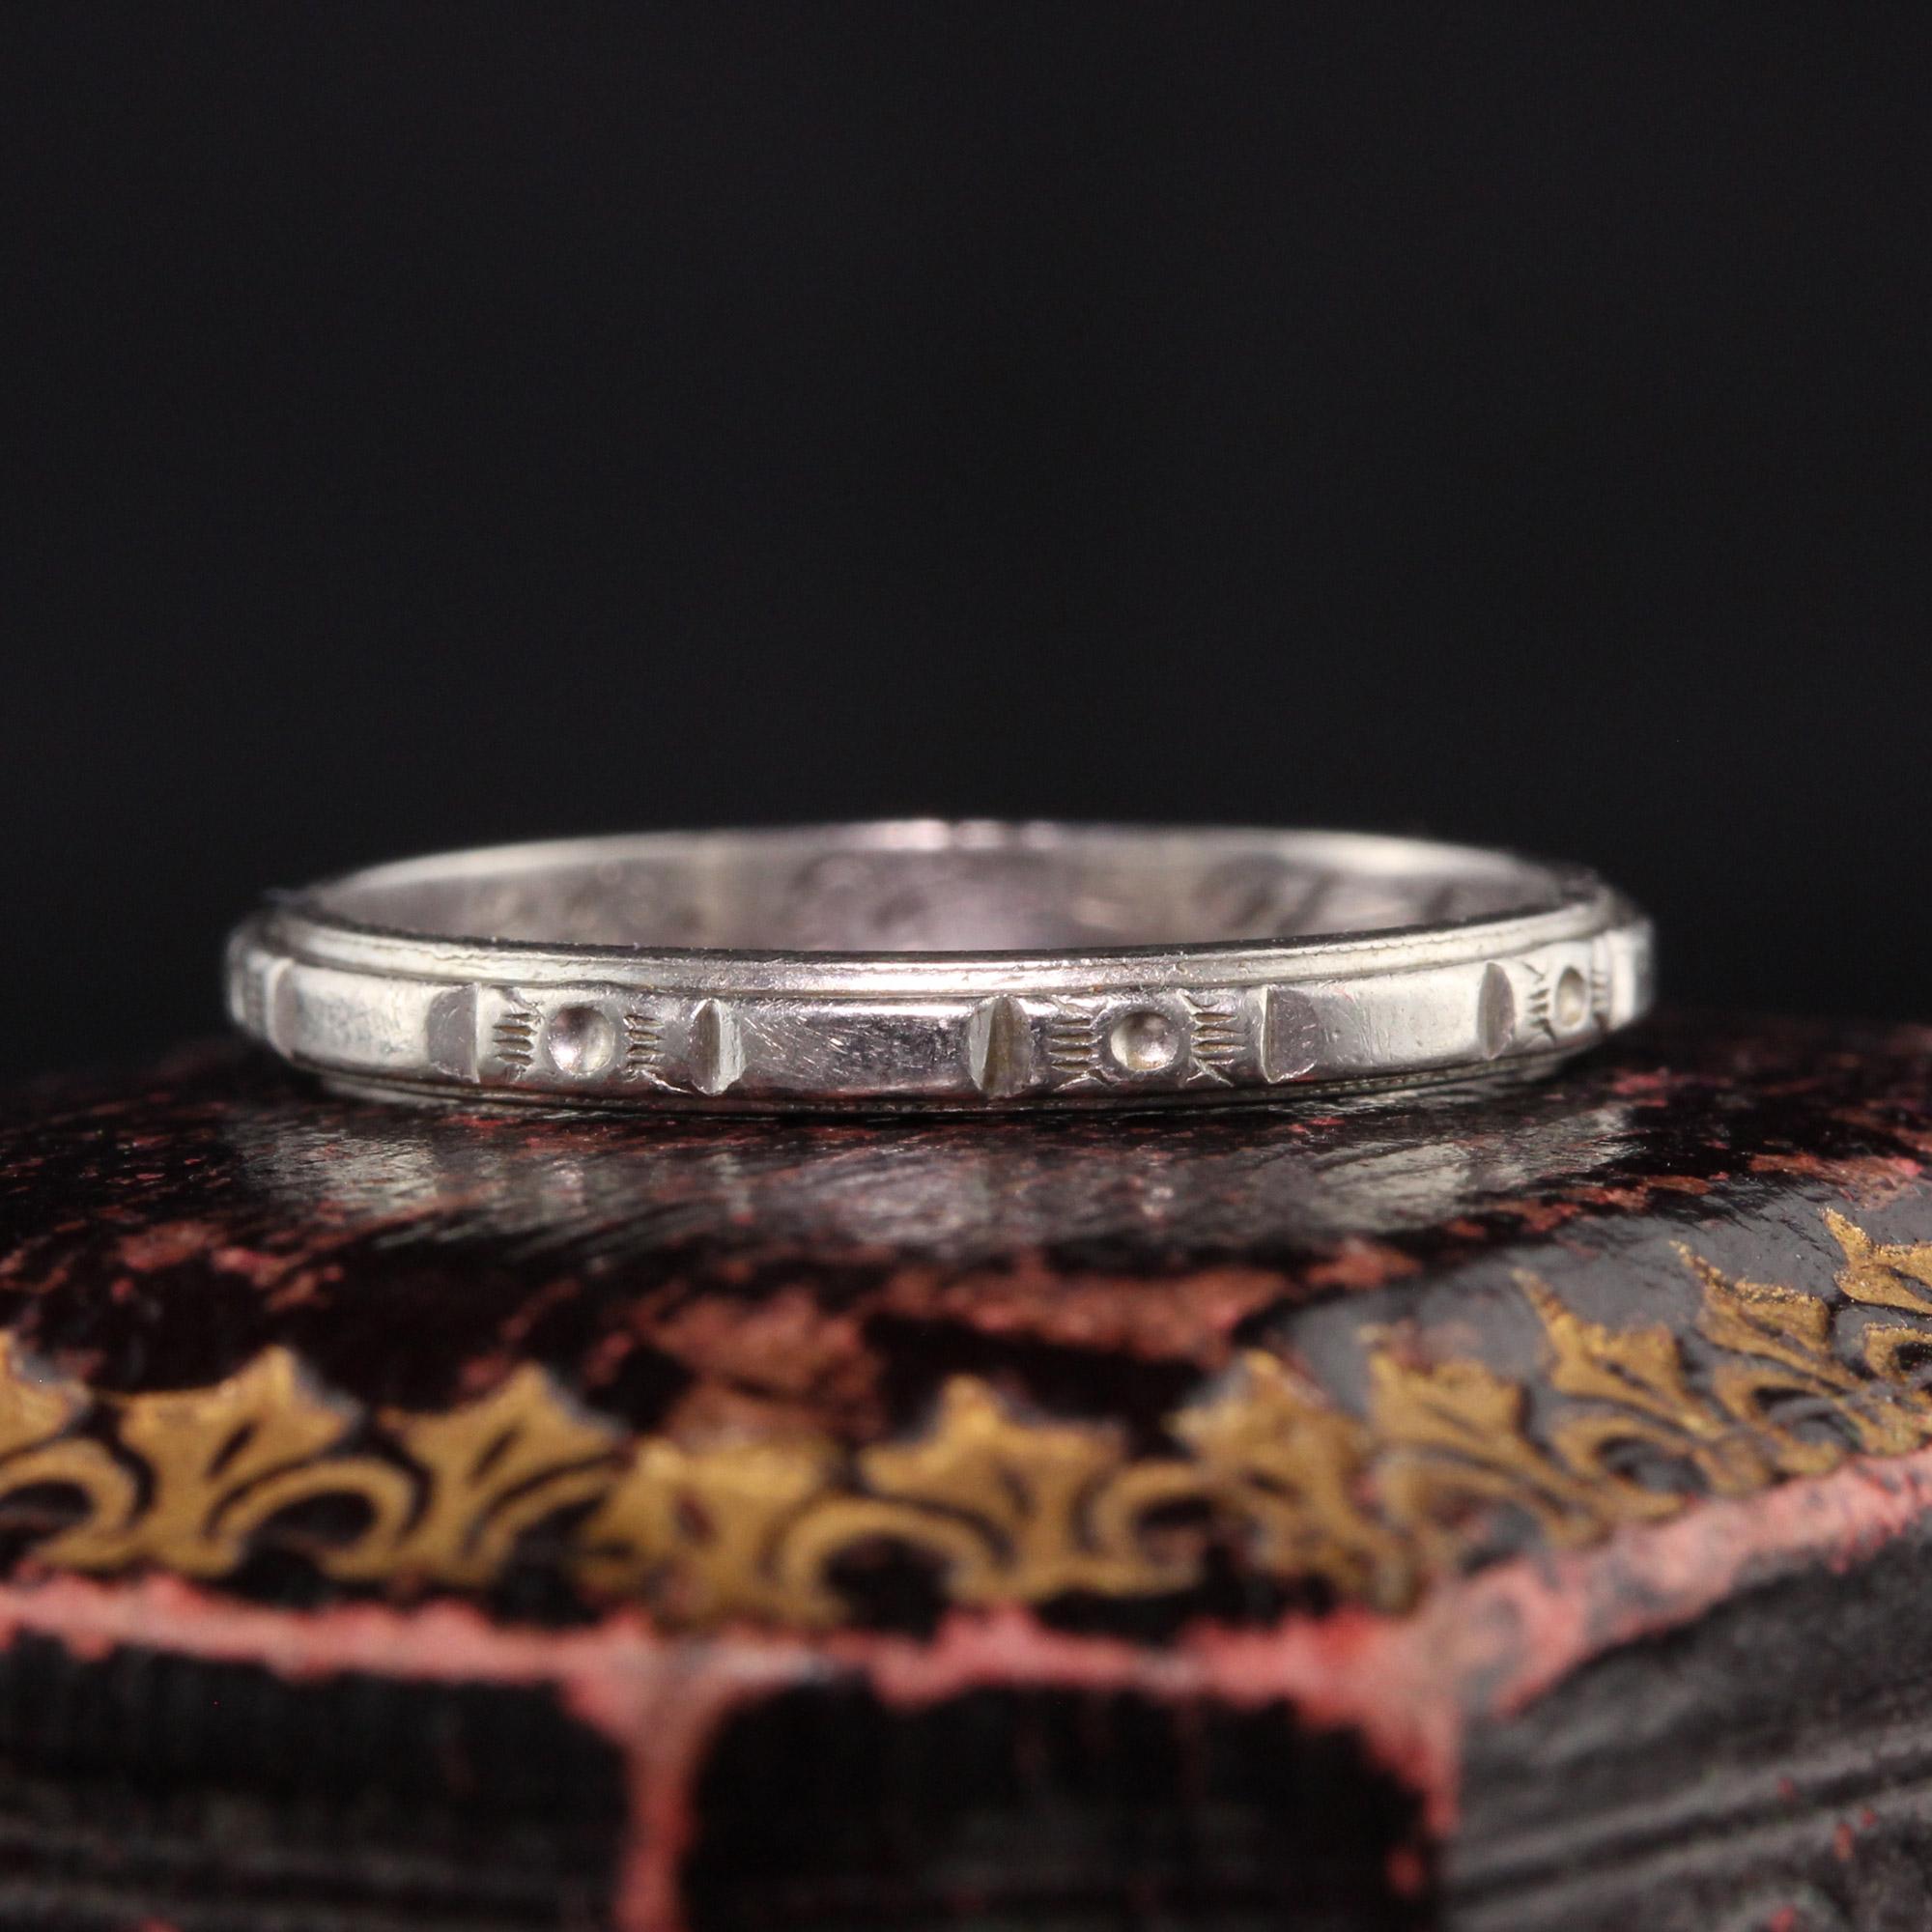 Beautiful Antique Art Deco Berman and Co Platinum Engraved Wedding Band. This beautiful Art Deco wedding band is crafted in platinum. it has beautiful classic engravings on it with the inside of the band being engraved 